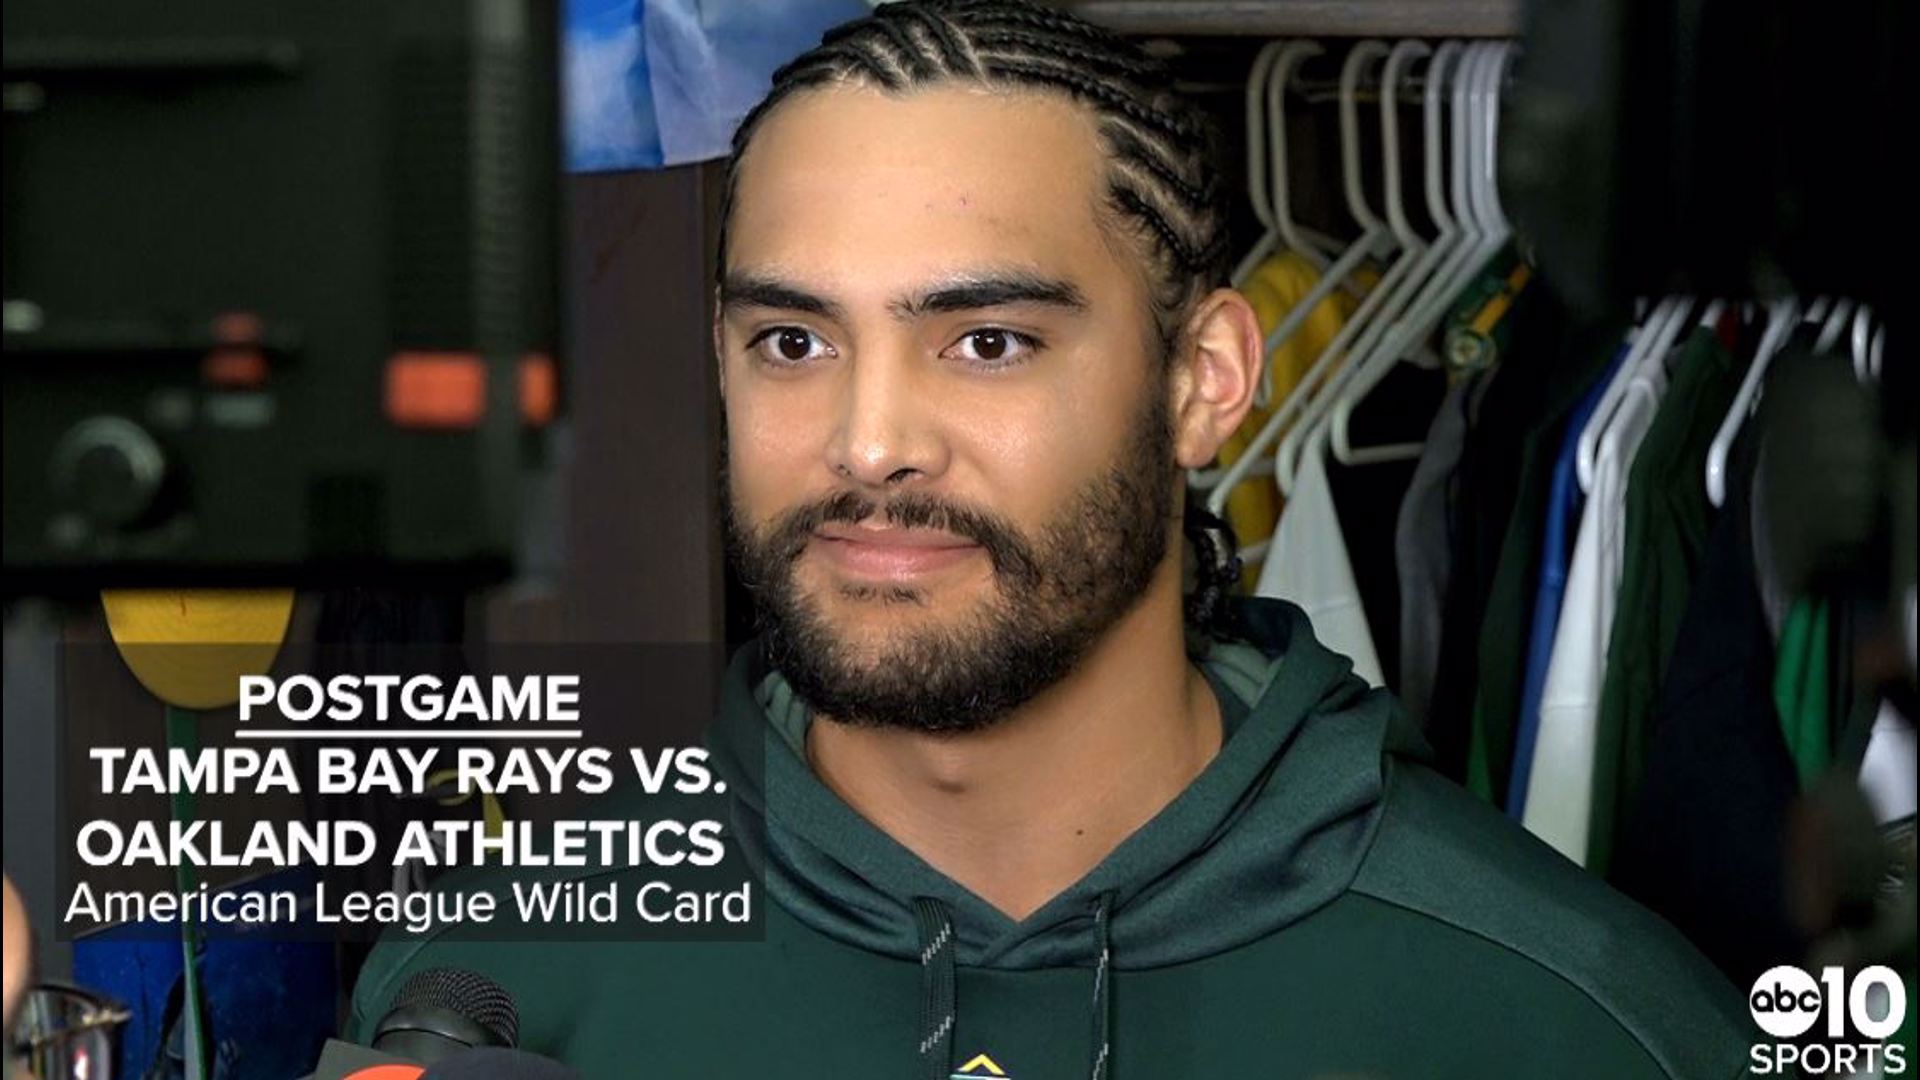 Oakland A's starting pitcher Sean Manaea addresses the media after a 5-1 loss to the Tampa Bay Rays in the American League Wild Card Game in his postseason debut.